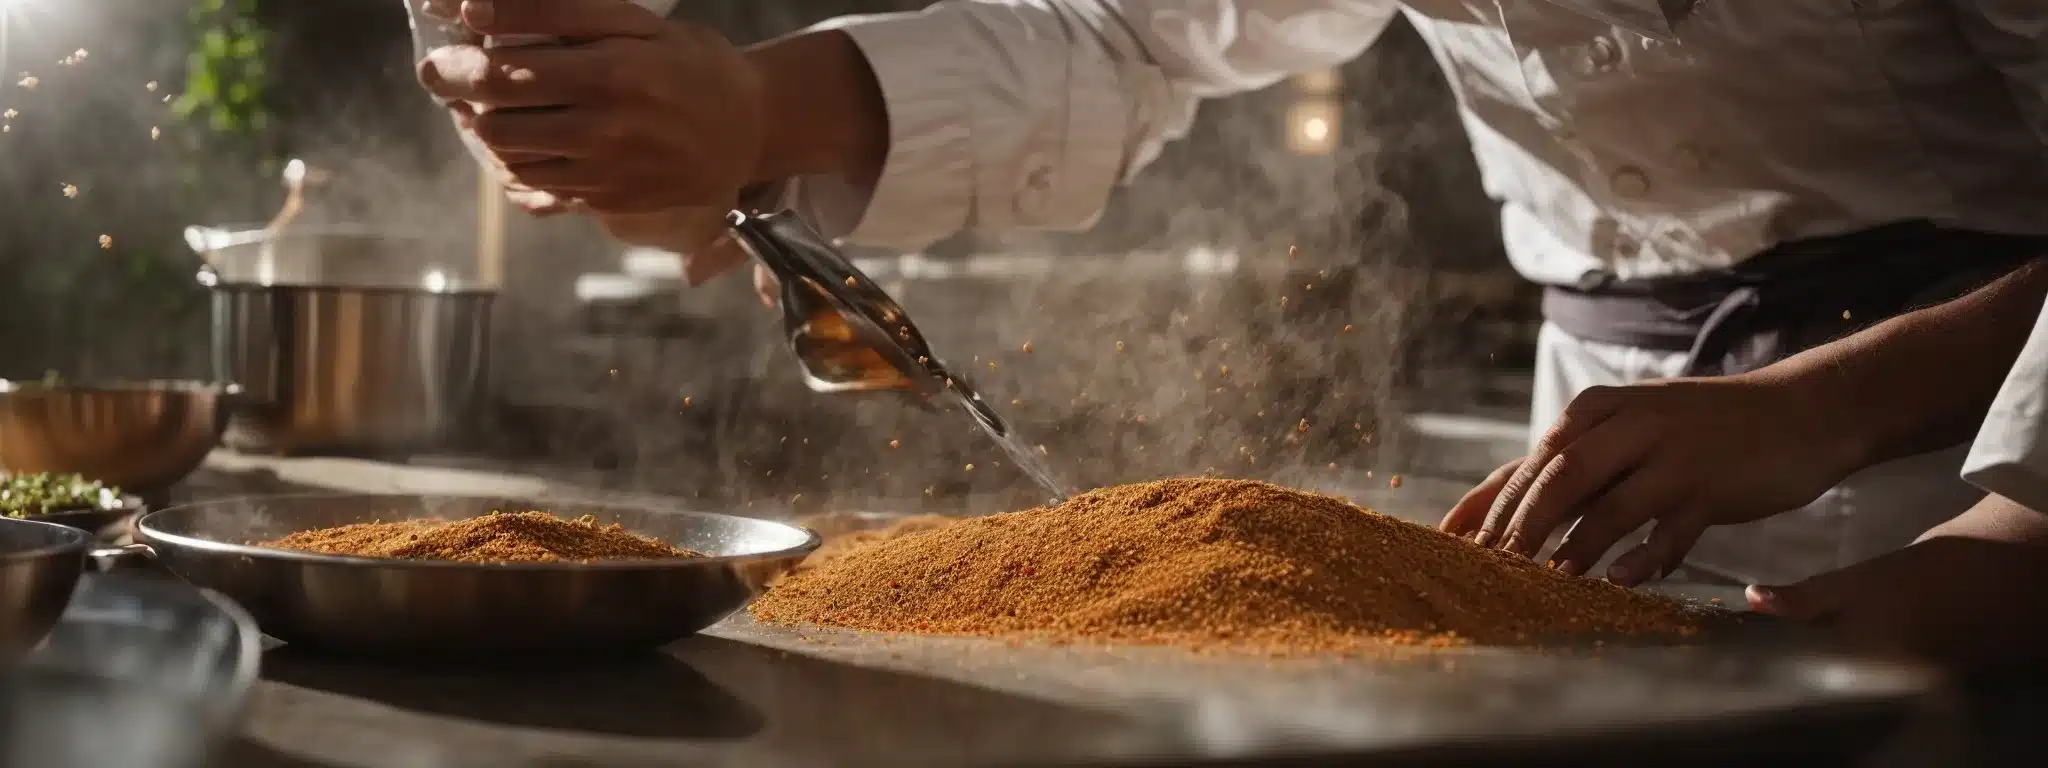 A Master Chef Thoughtfully Sprinkling Spices Over A Gourmet Dish In A Sunlit, High-End Kitchen.